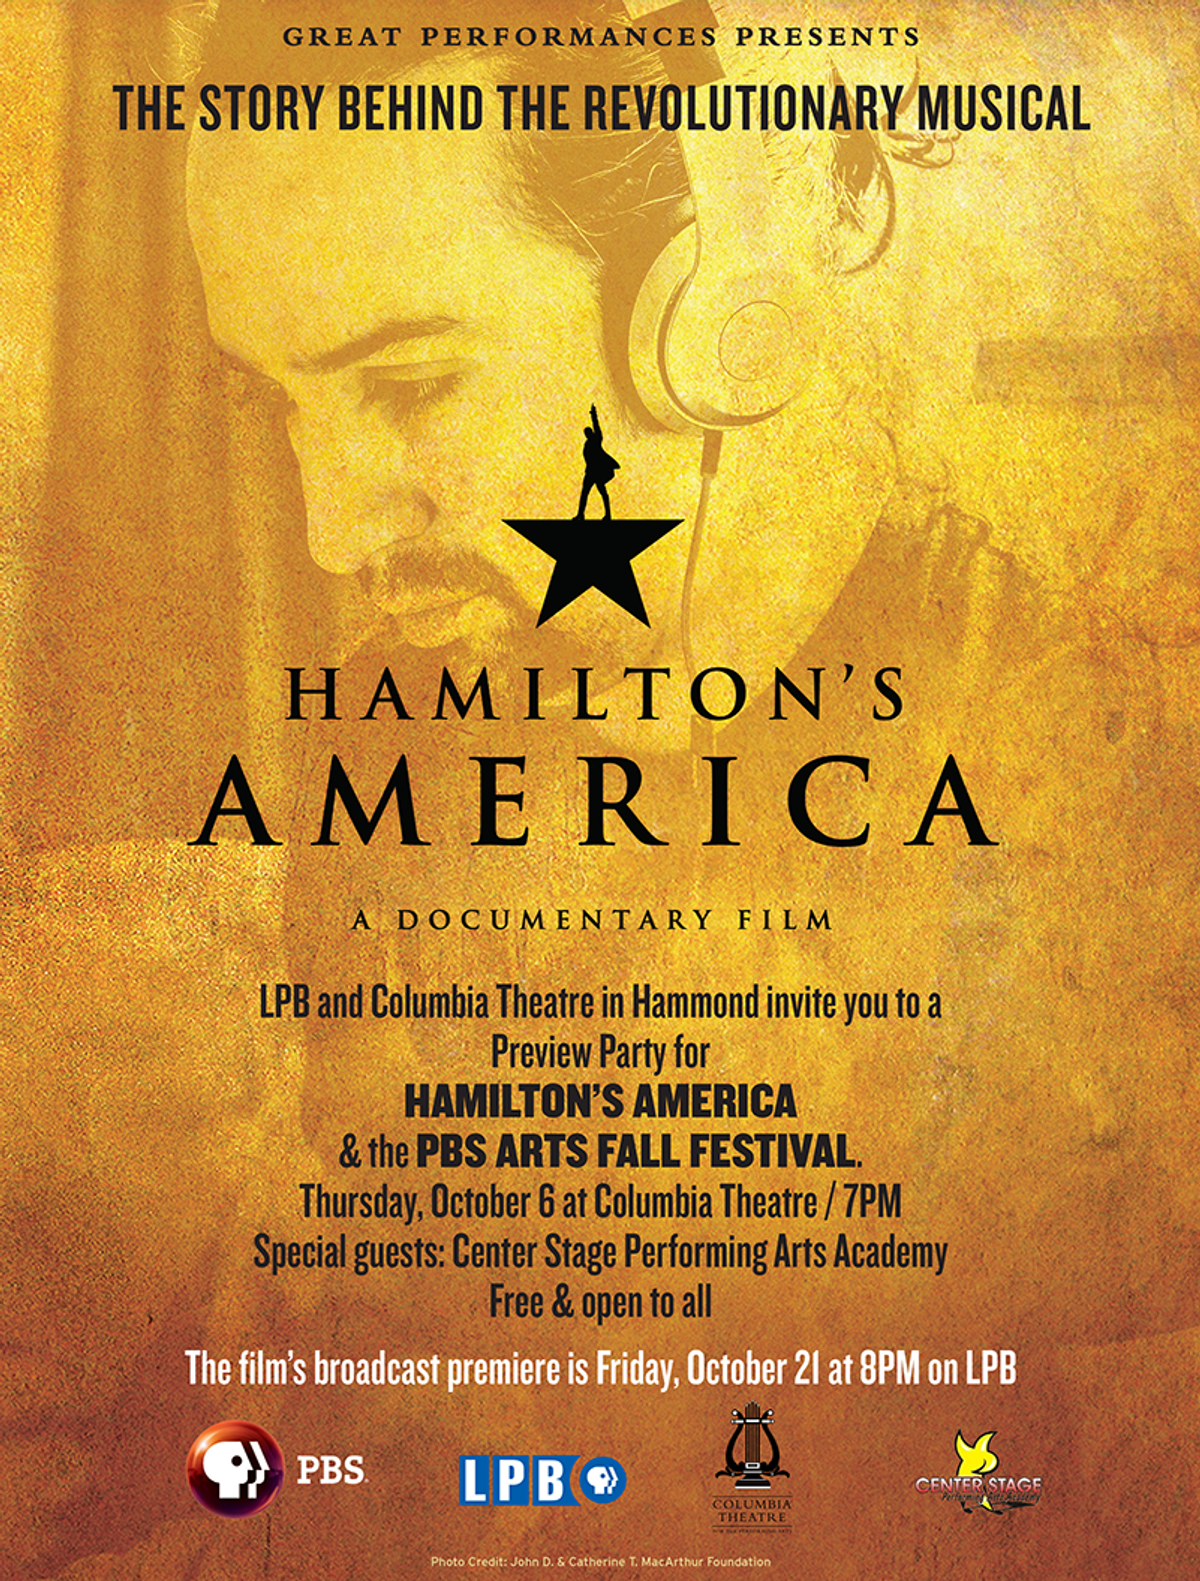 'Hamilton's America' -- A Documentary About a Musical and a Founding Father